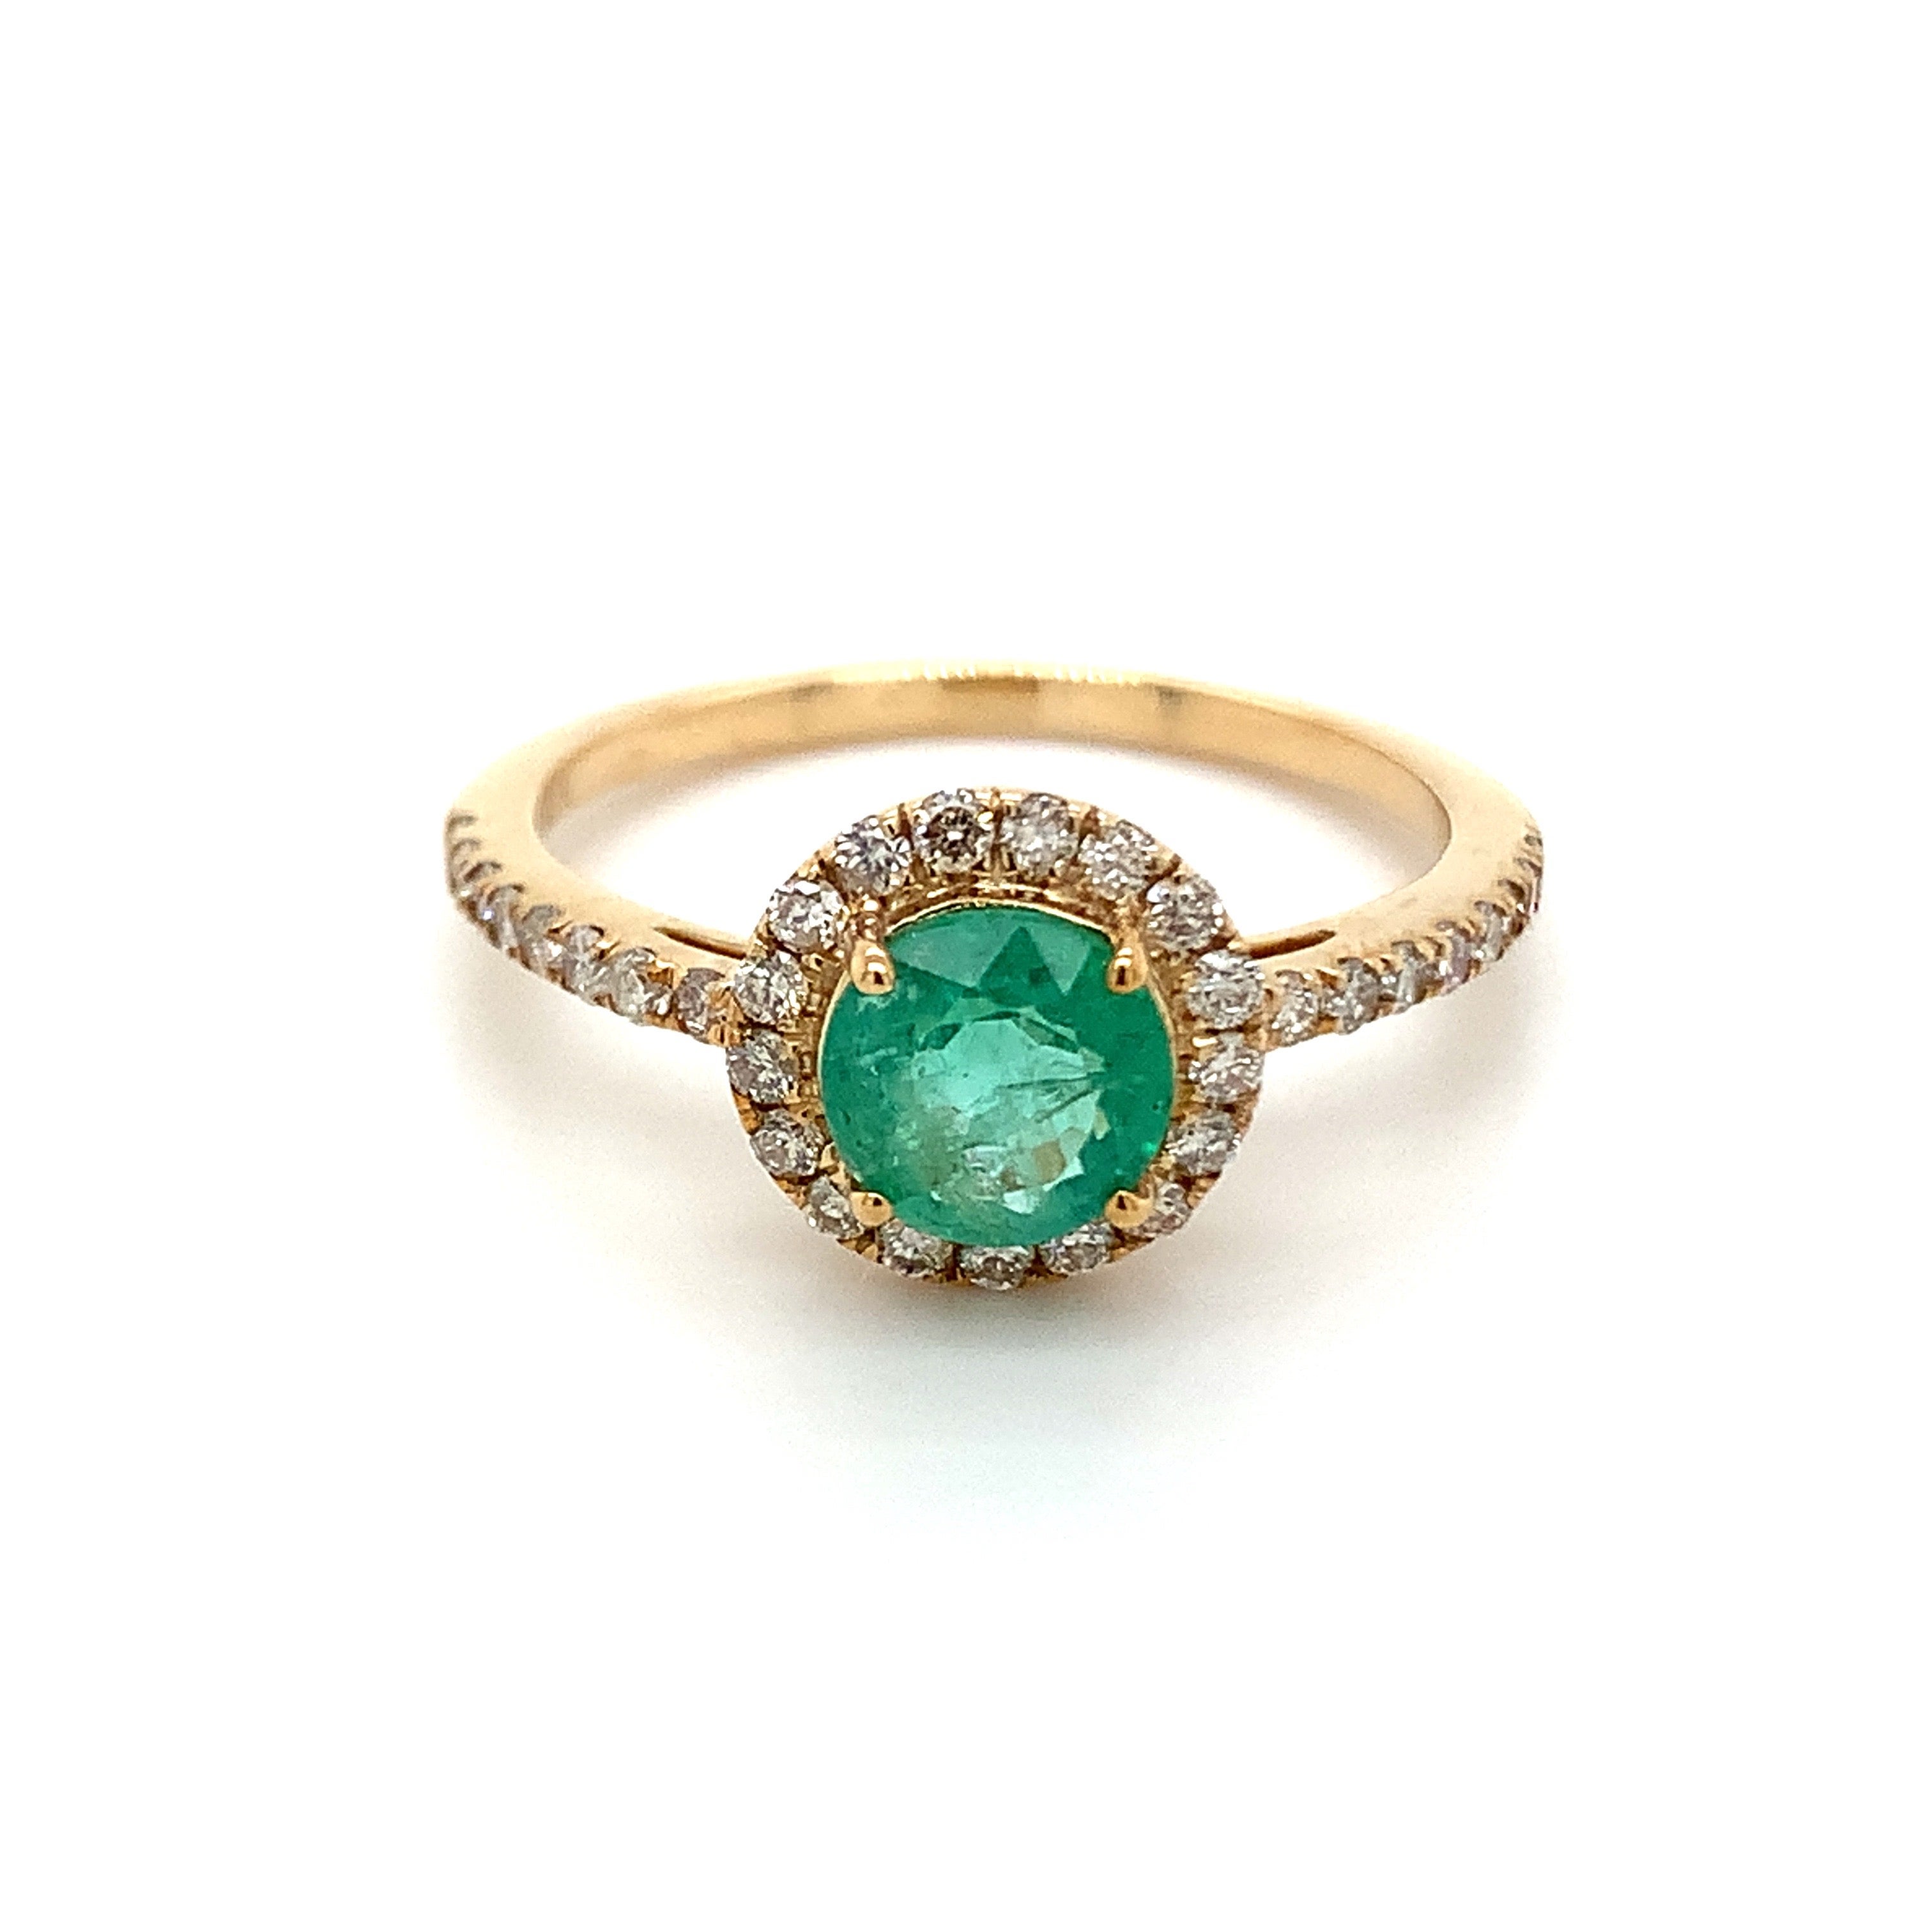 0.77 Carat Round Emerald Ring with Diamonds in 10k Yellow Gold